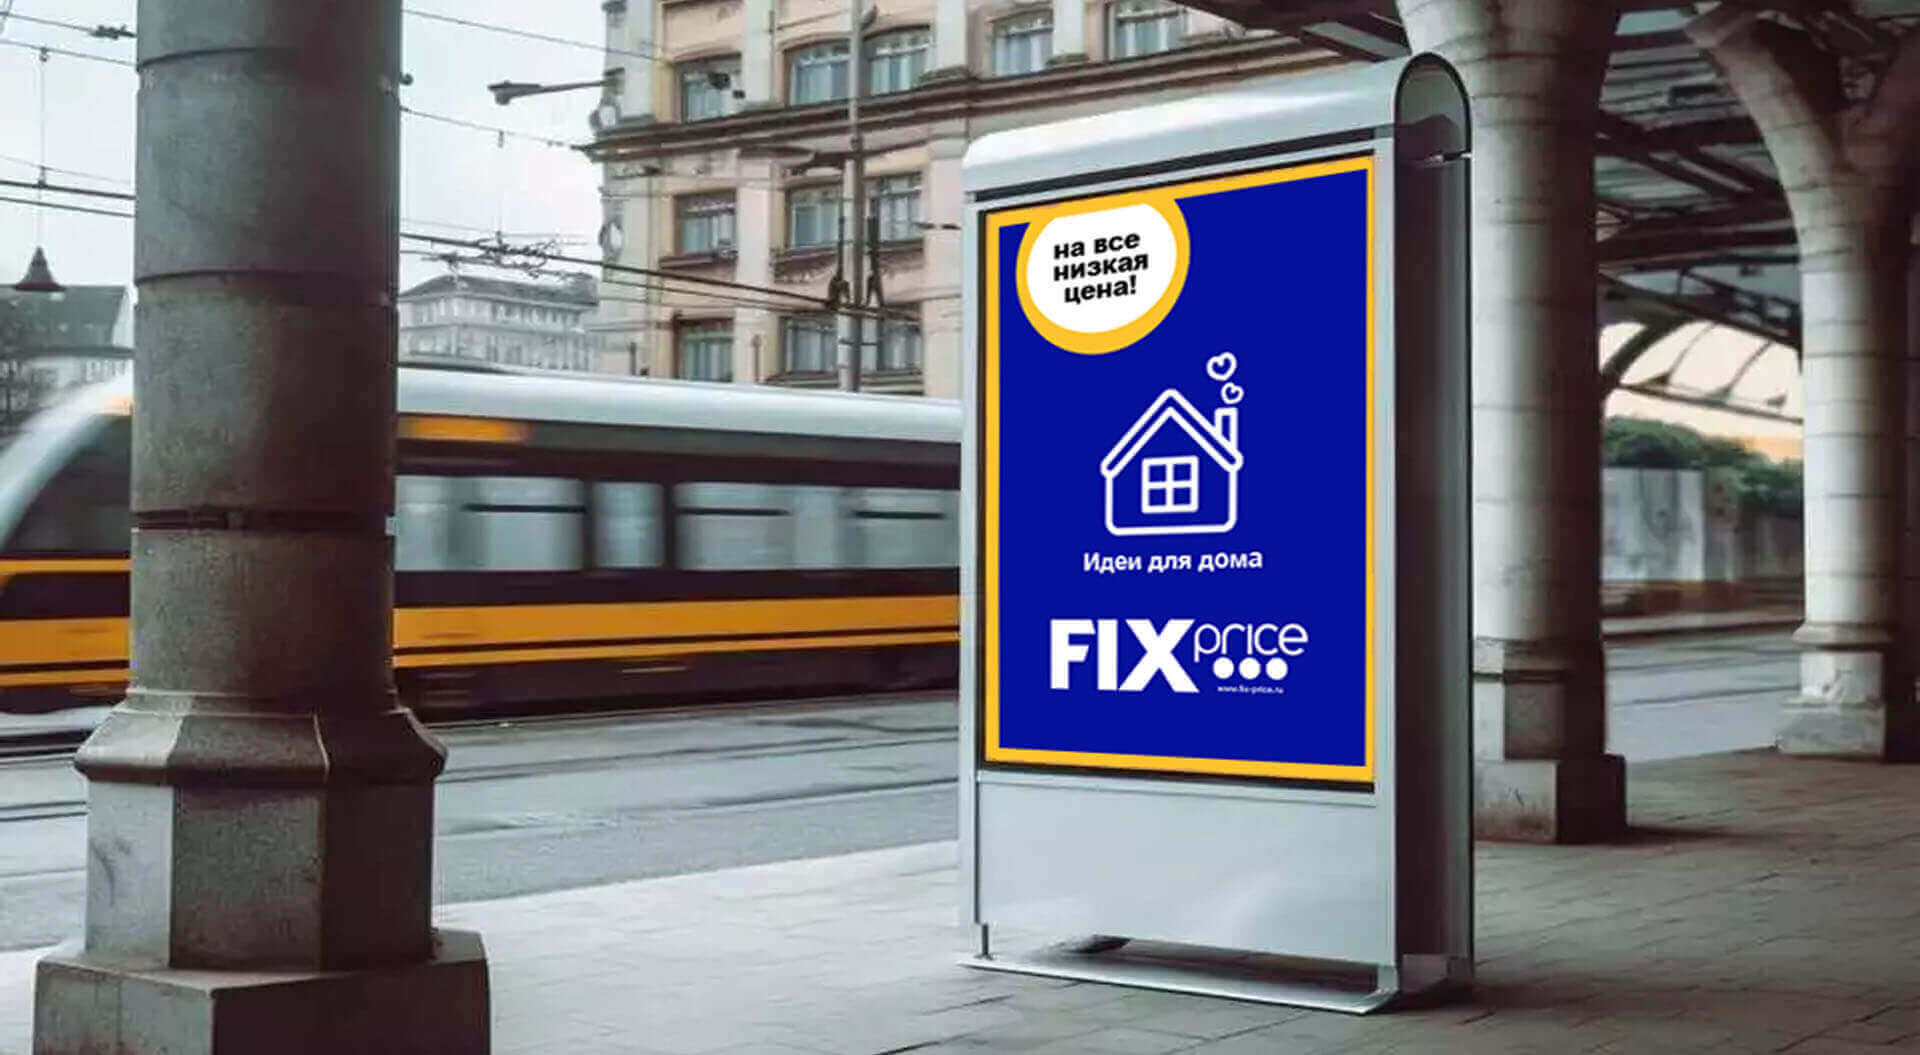 Fix Price Russia, Billboards and Outdoor Advertising, Retail Branding, Brand Identity, Store Interior Design, Graphic Communications - CampbellRigg Agency